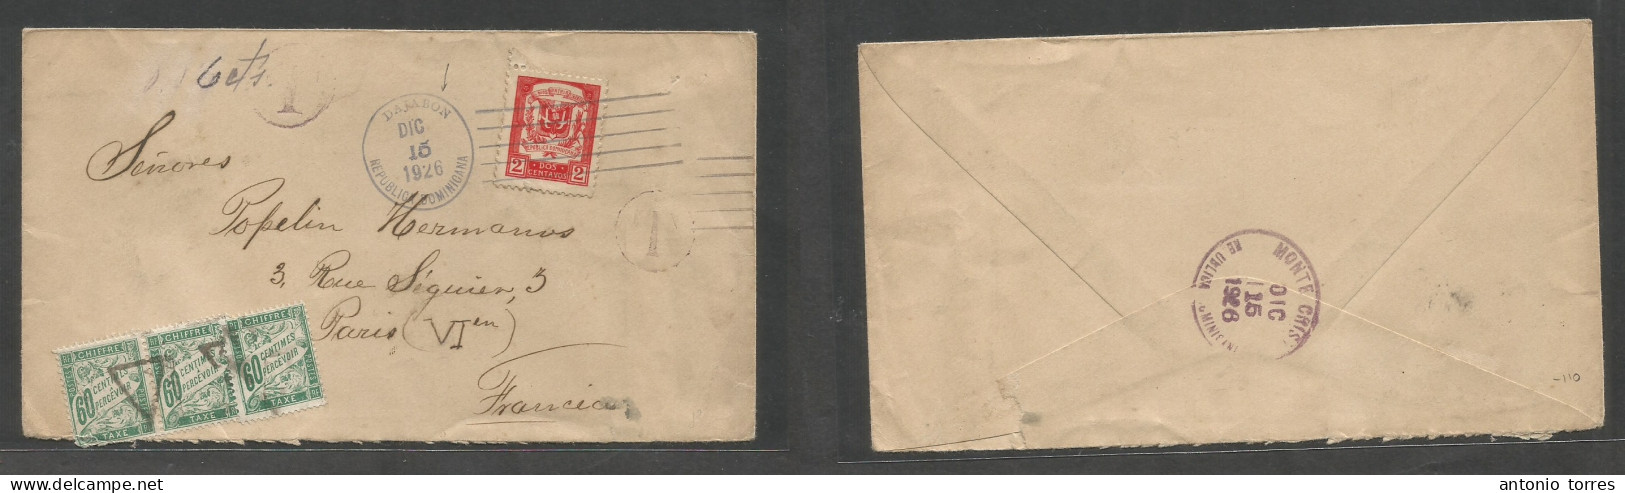 Dominican Rep. 1926 (15 Dic) Dajabon - France, Paris. 2c Red Single Fkd Env, Taxed + Three French P. Dues, Cancelled At - República Dominicana